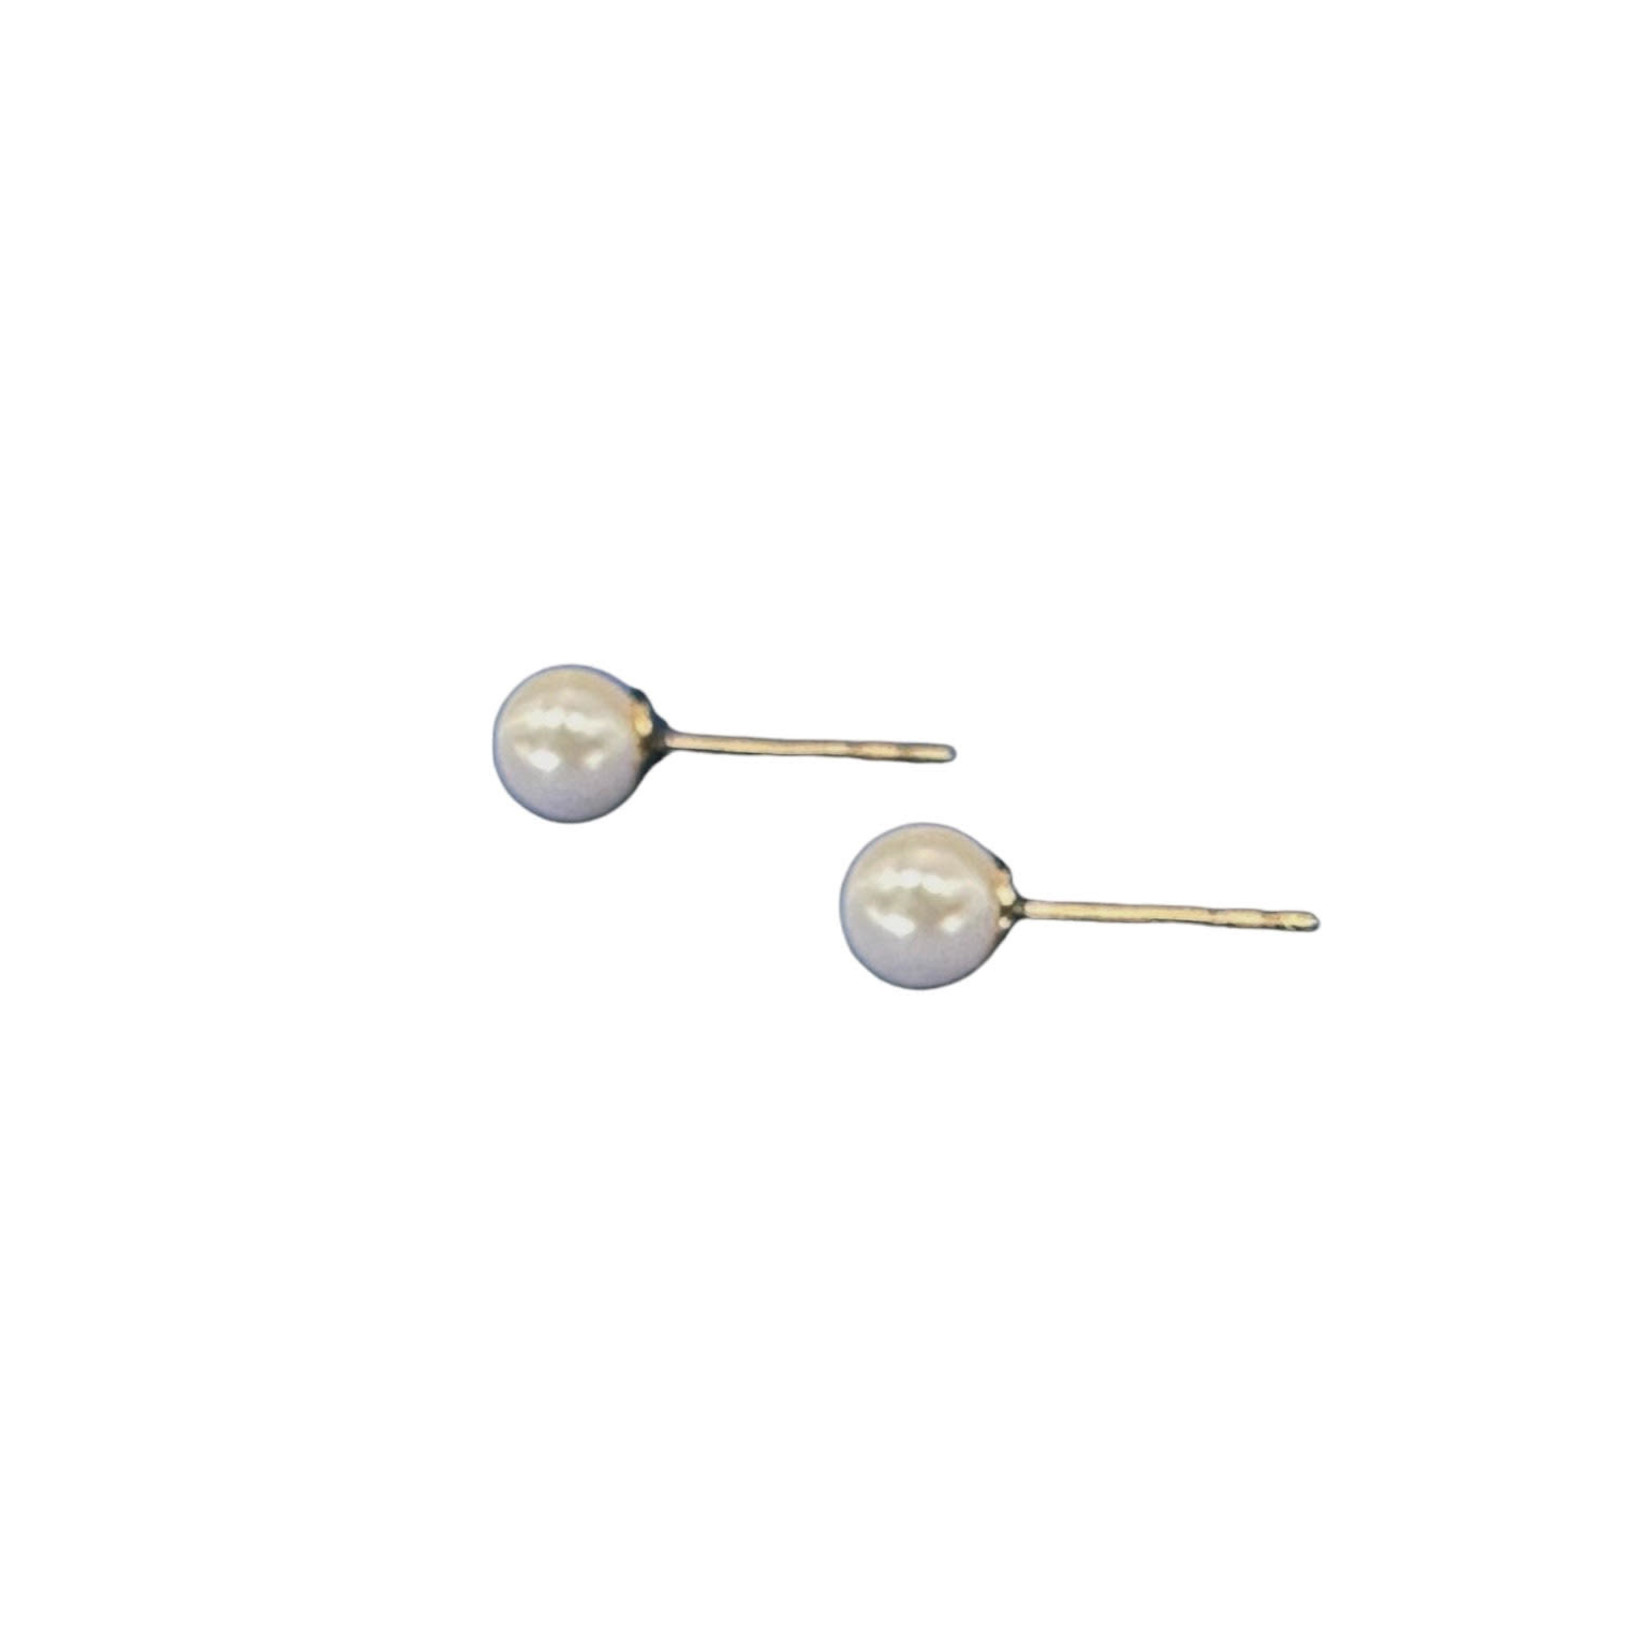 4.0mm White Crystal Pearl Gold Fill Post Earrings